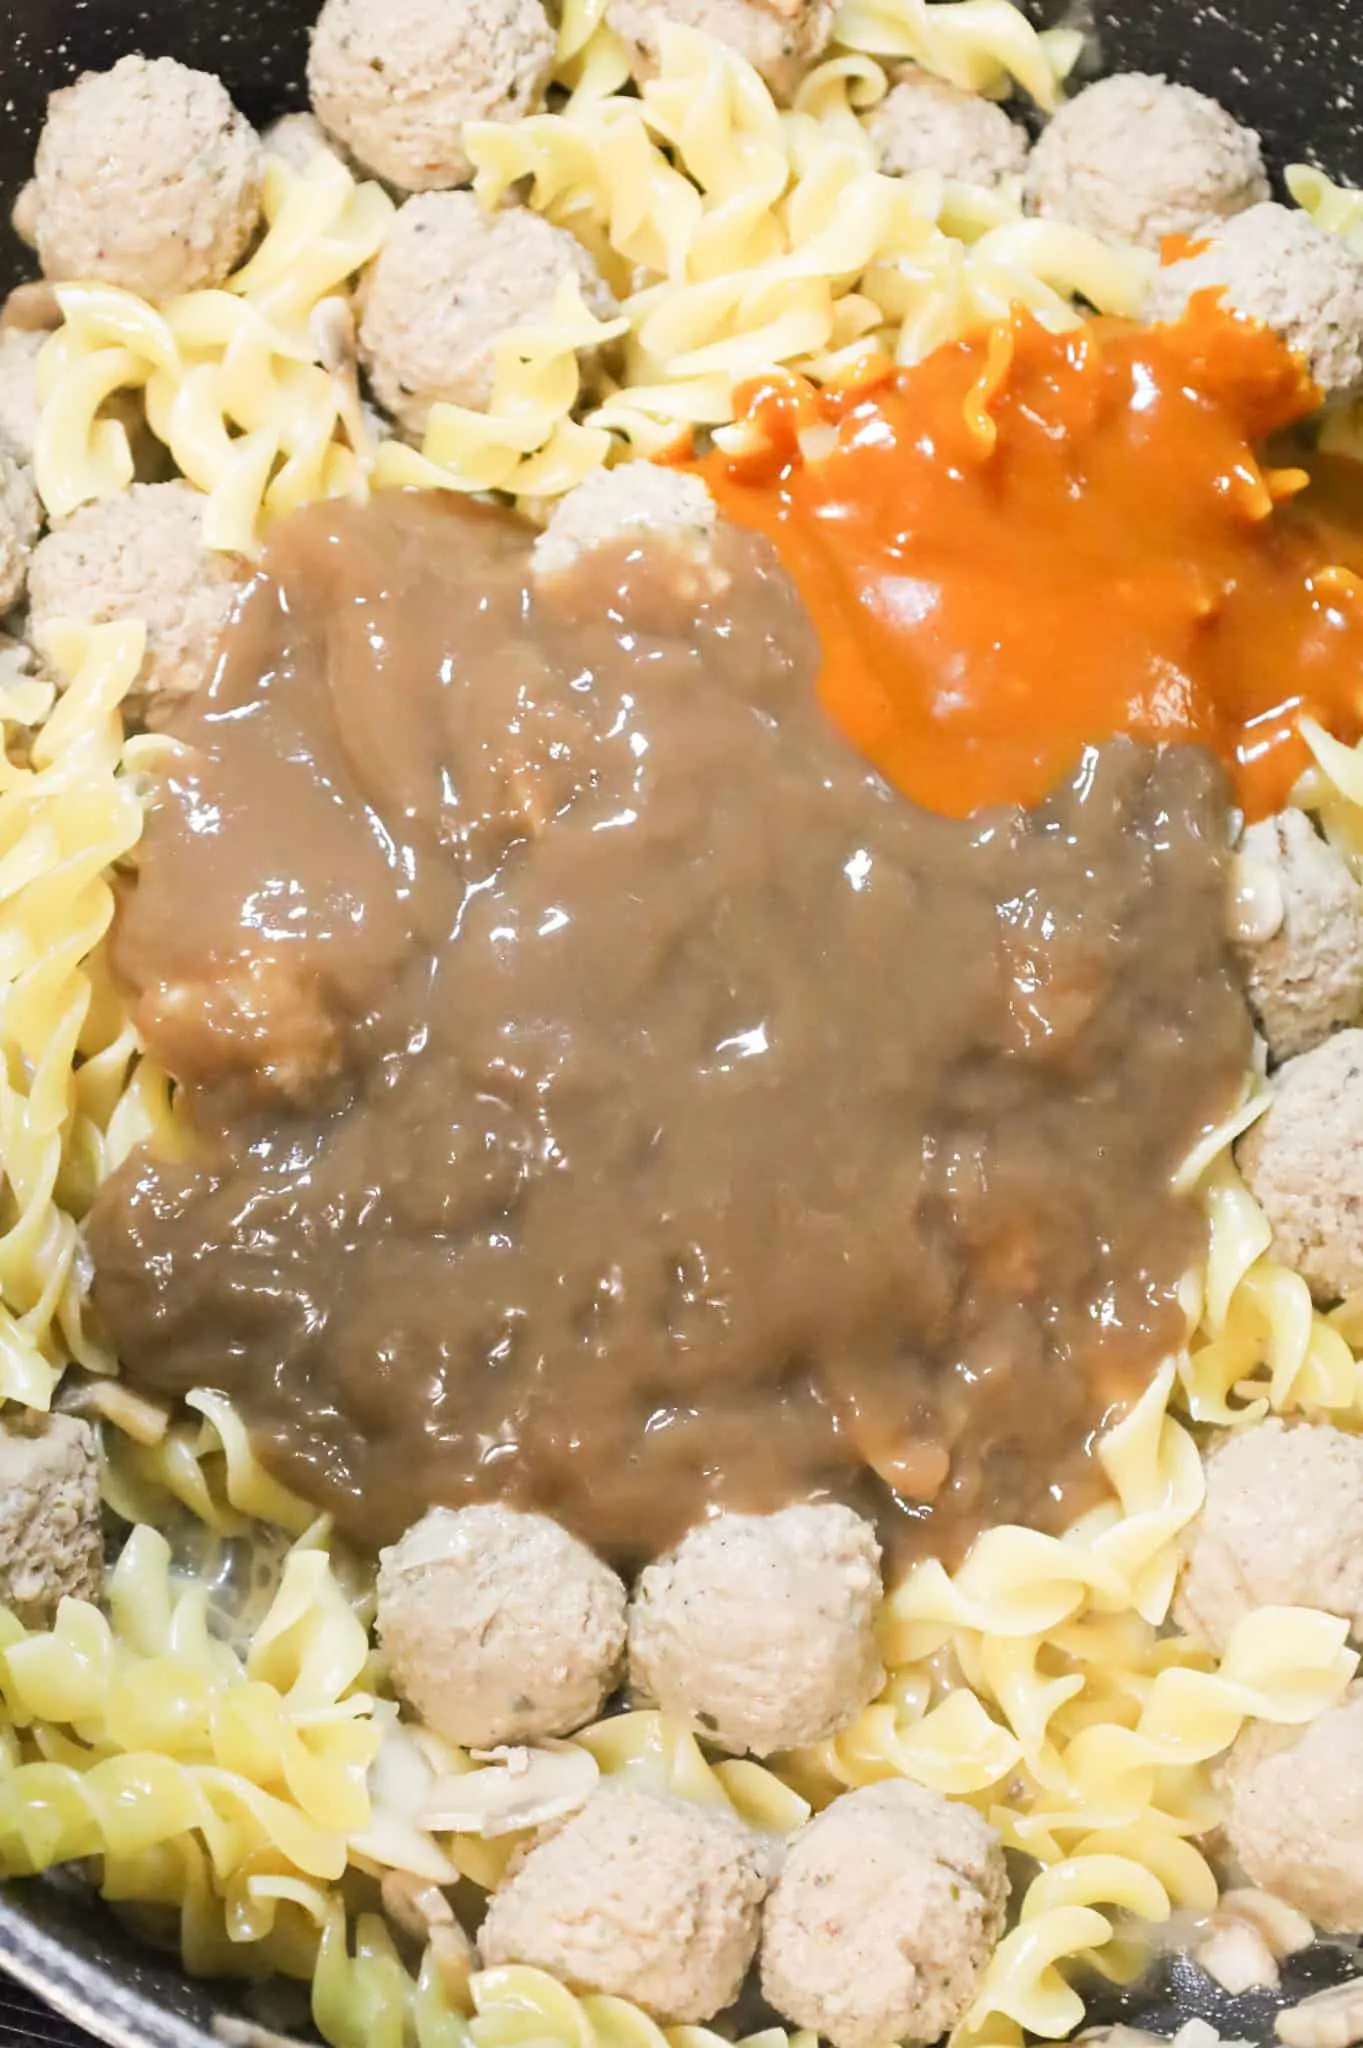 beef gravy and Heinz 57 sauce on top of meatballs and egg noodles in a skillet